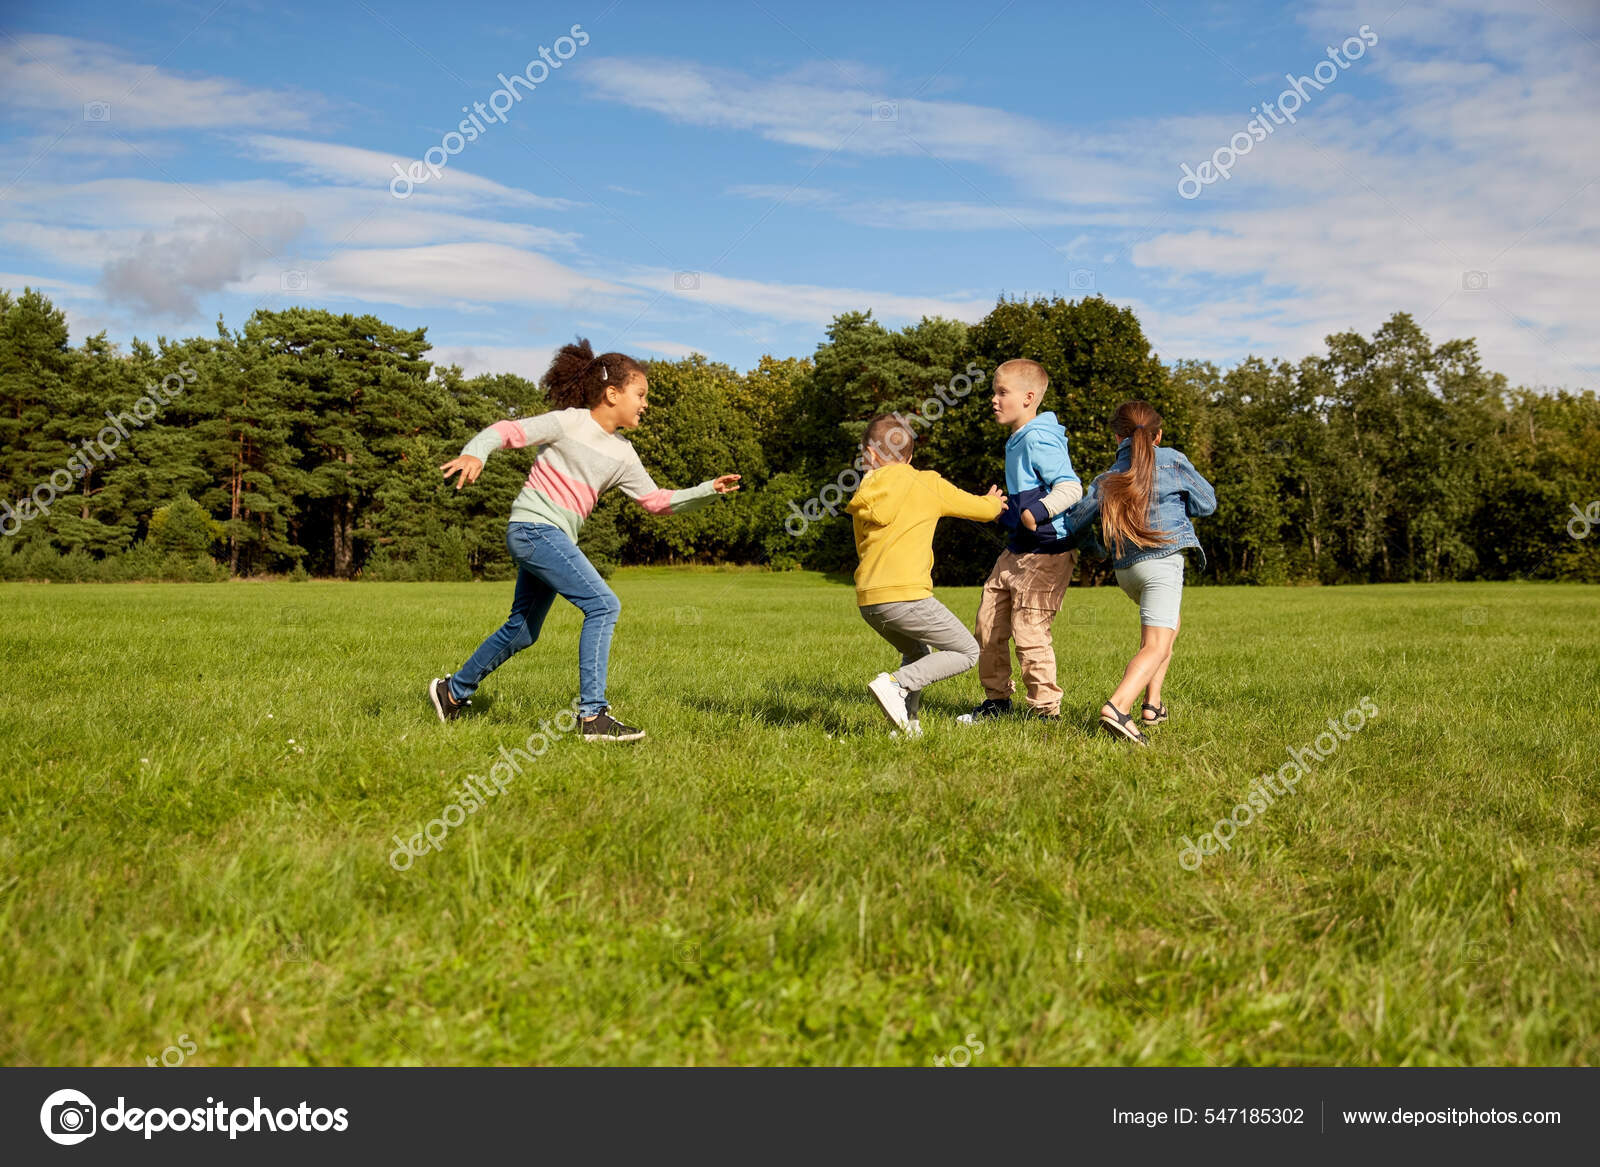 A game of tag stock image